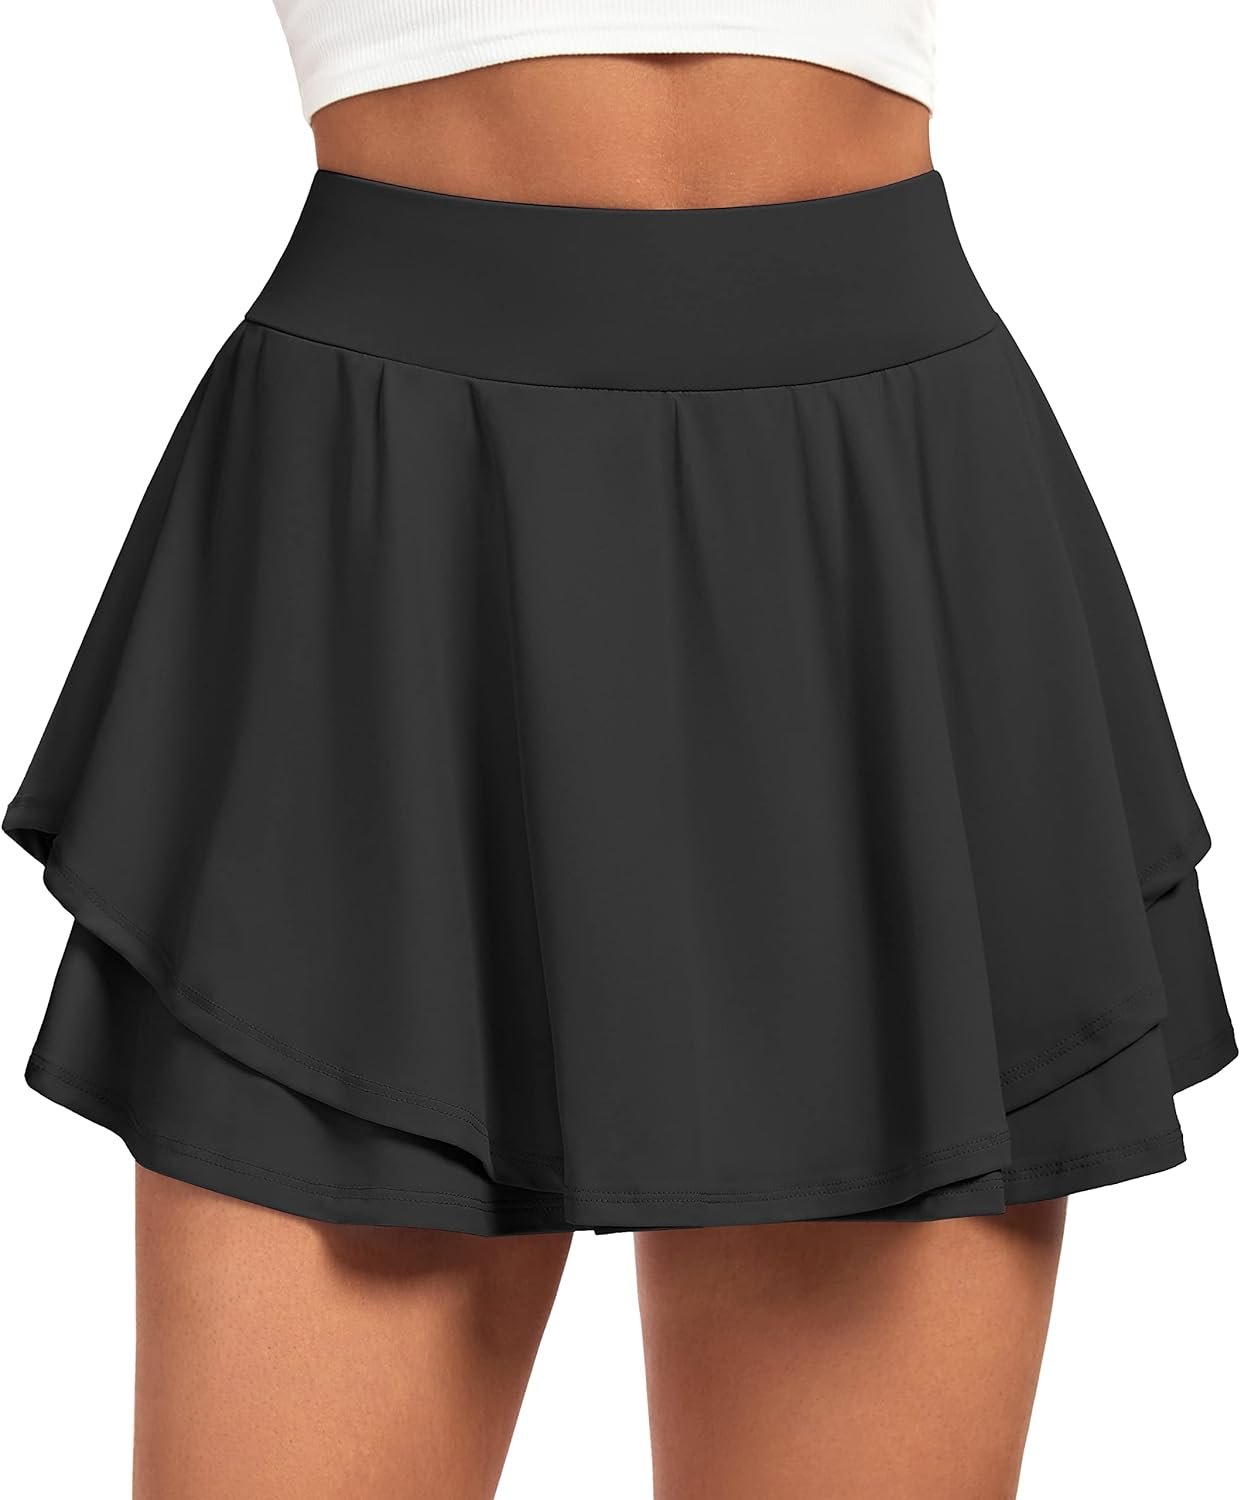 IUGA Tennis Skirts for Women with Pockets Shorts Athletic Golf Skorts Skirts for Women High Waisted Running Workout Skorts